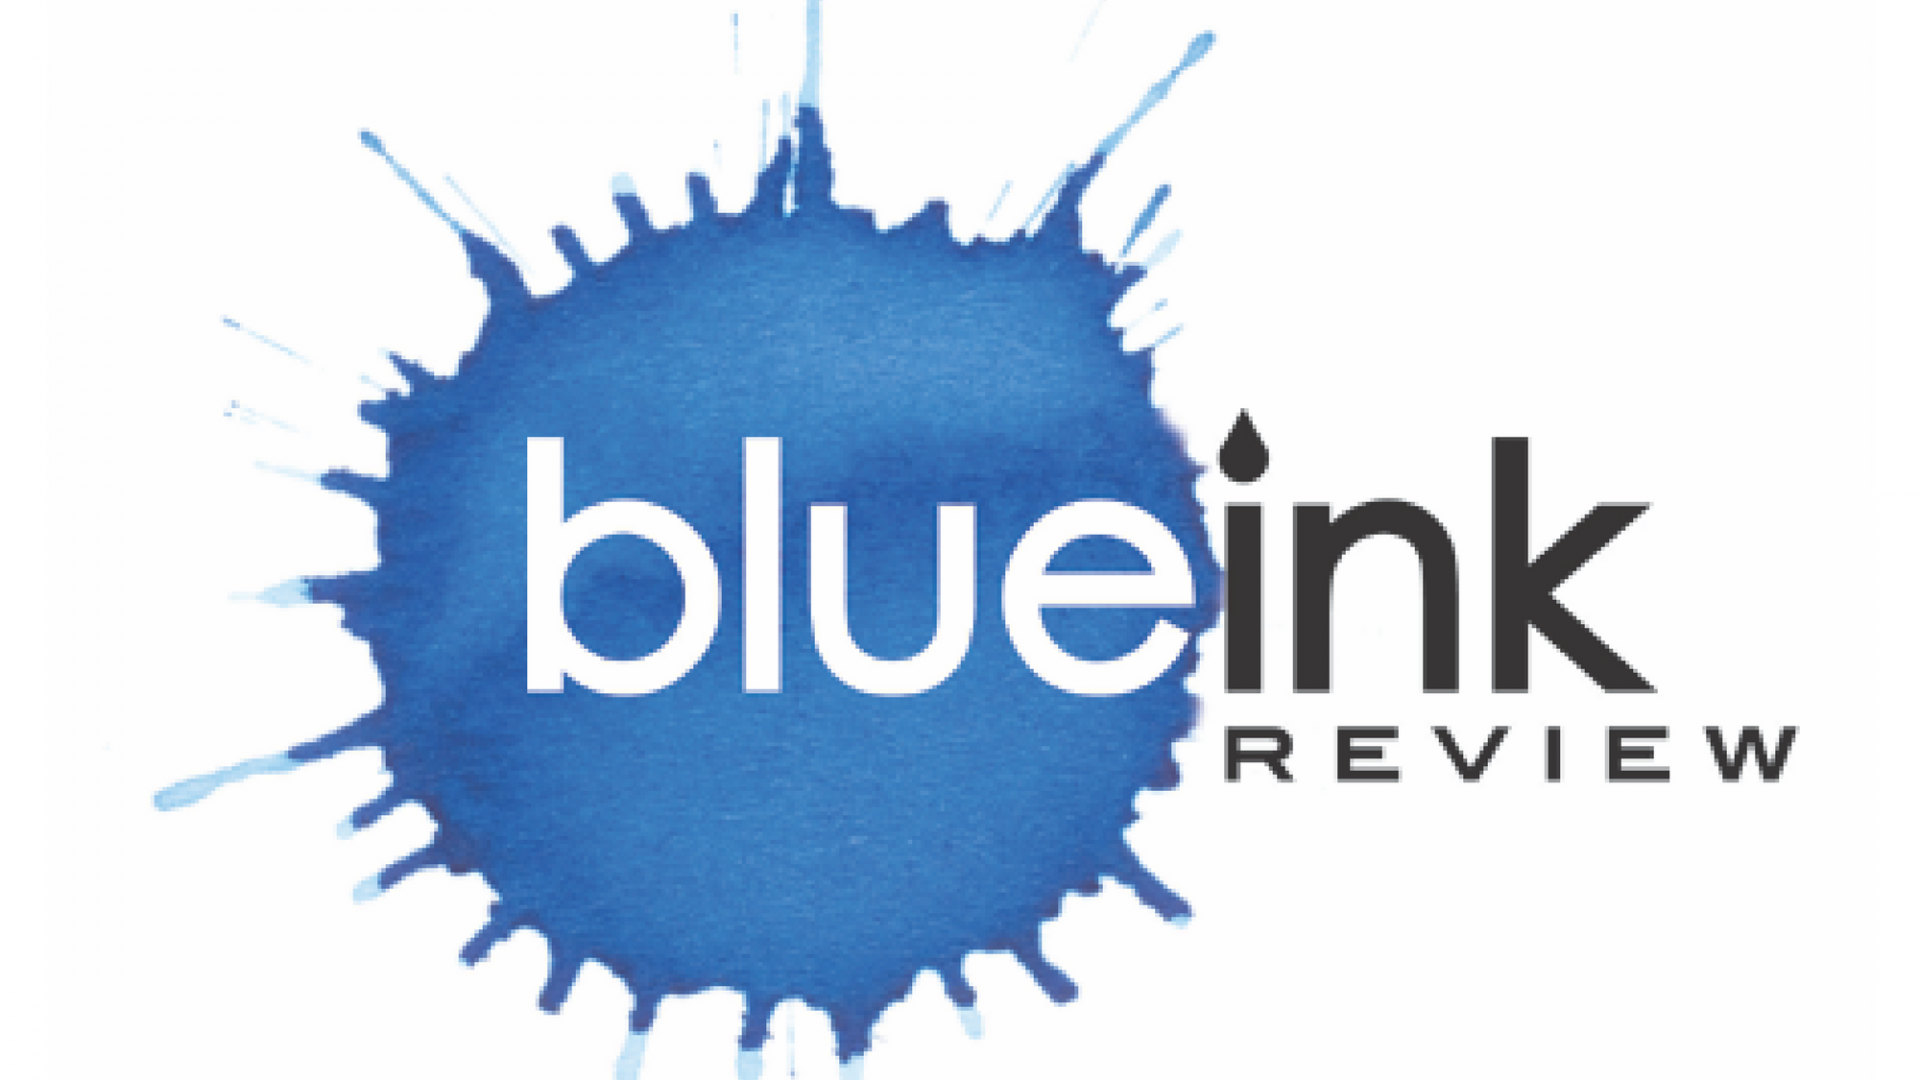 The Blue Ink Review